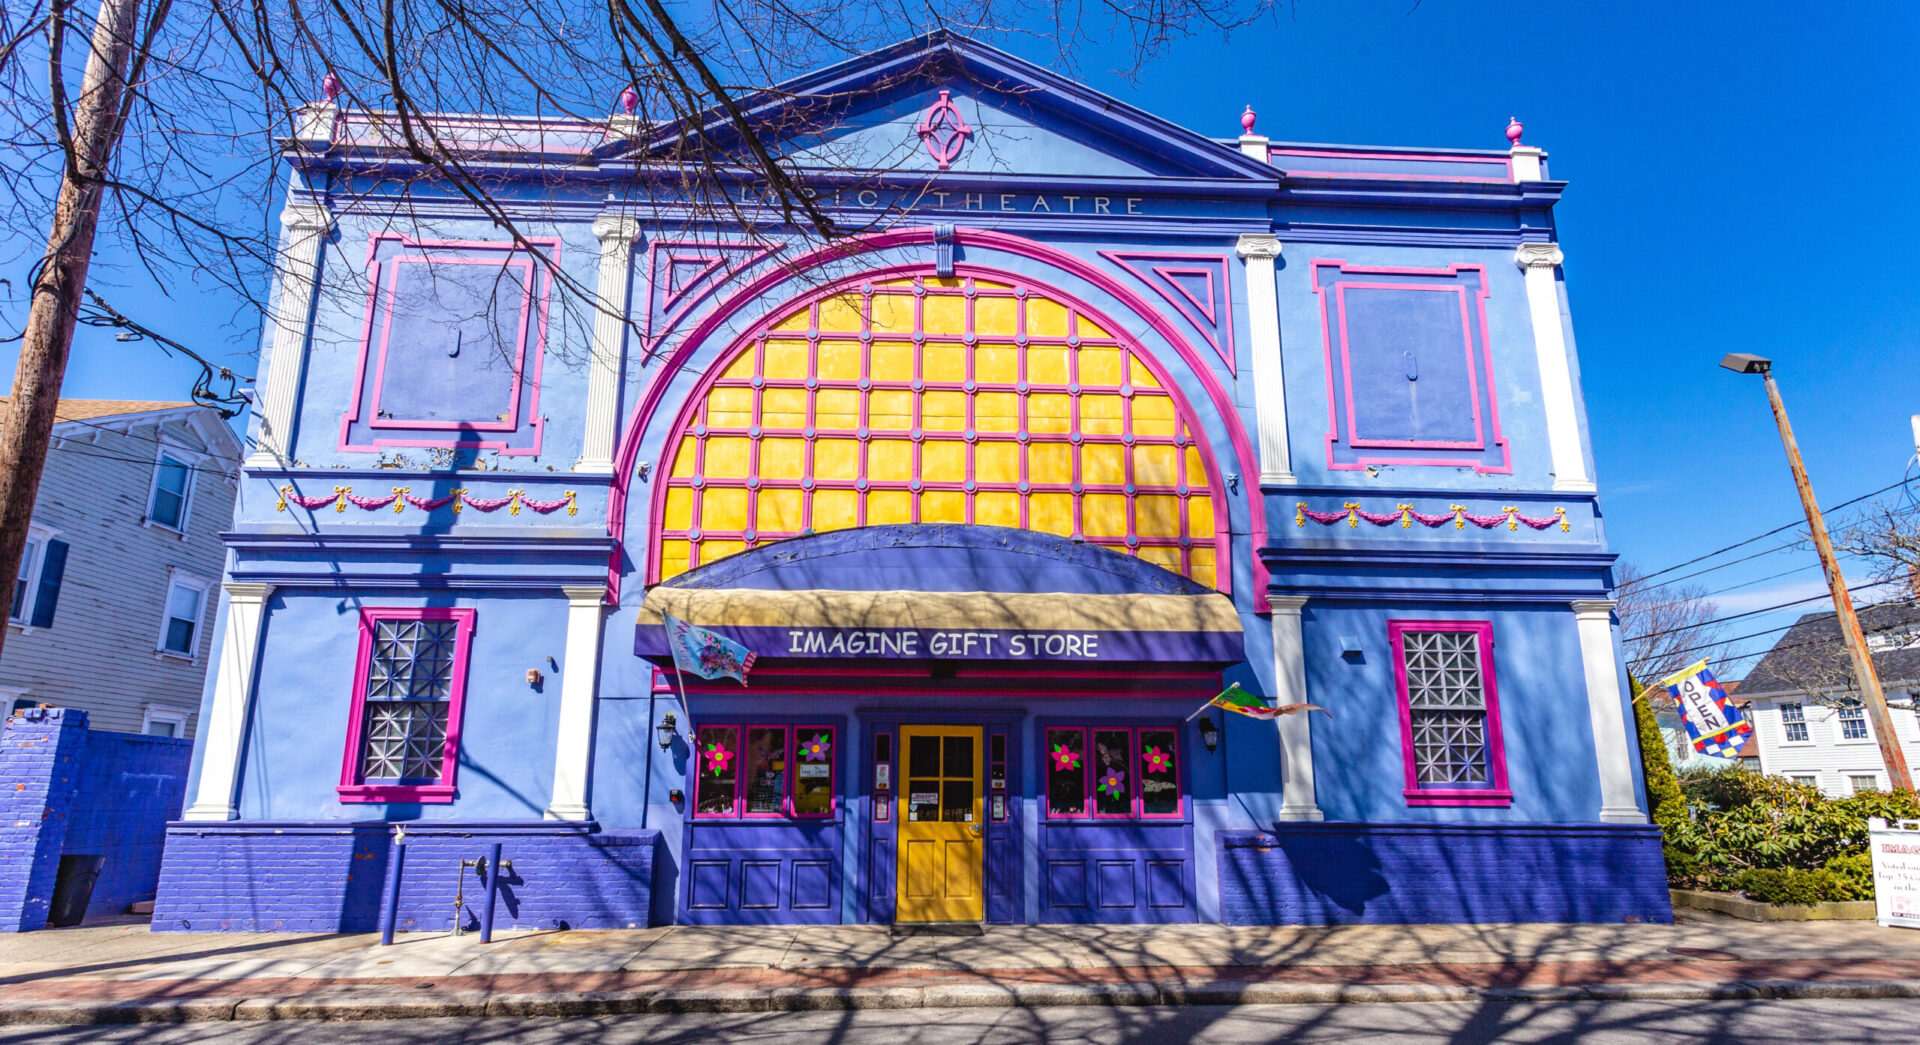 Front of Imagine Gift Store. A building with different shades of purple that is labeled "Lyric theater" at the top. There is a large mock window painted yellow with magenta highlights. Flags wave out front.